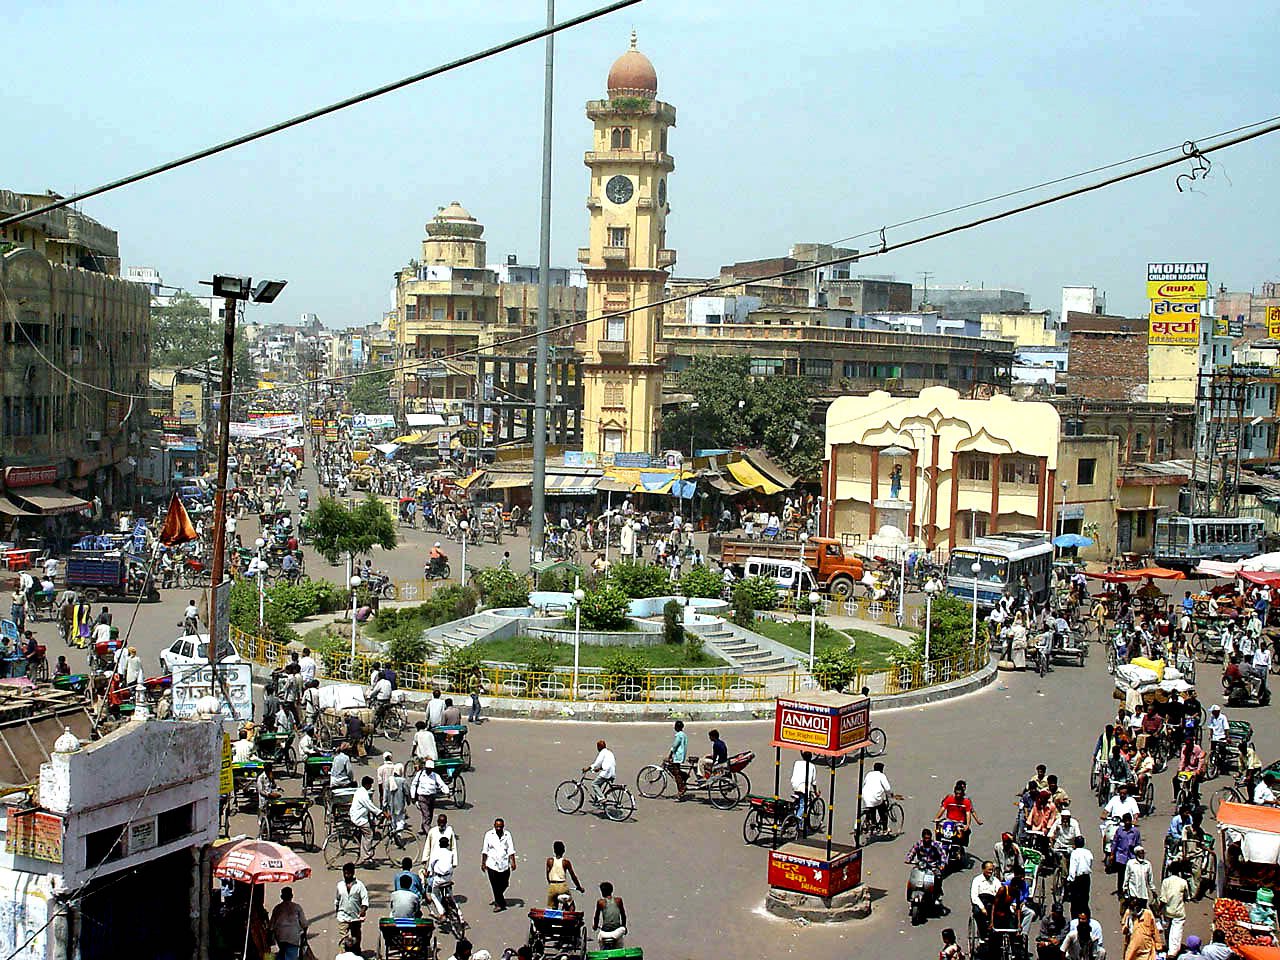 http://www.getbookcab.com/Admin/images/kanpur-city.jpg